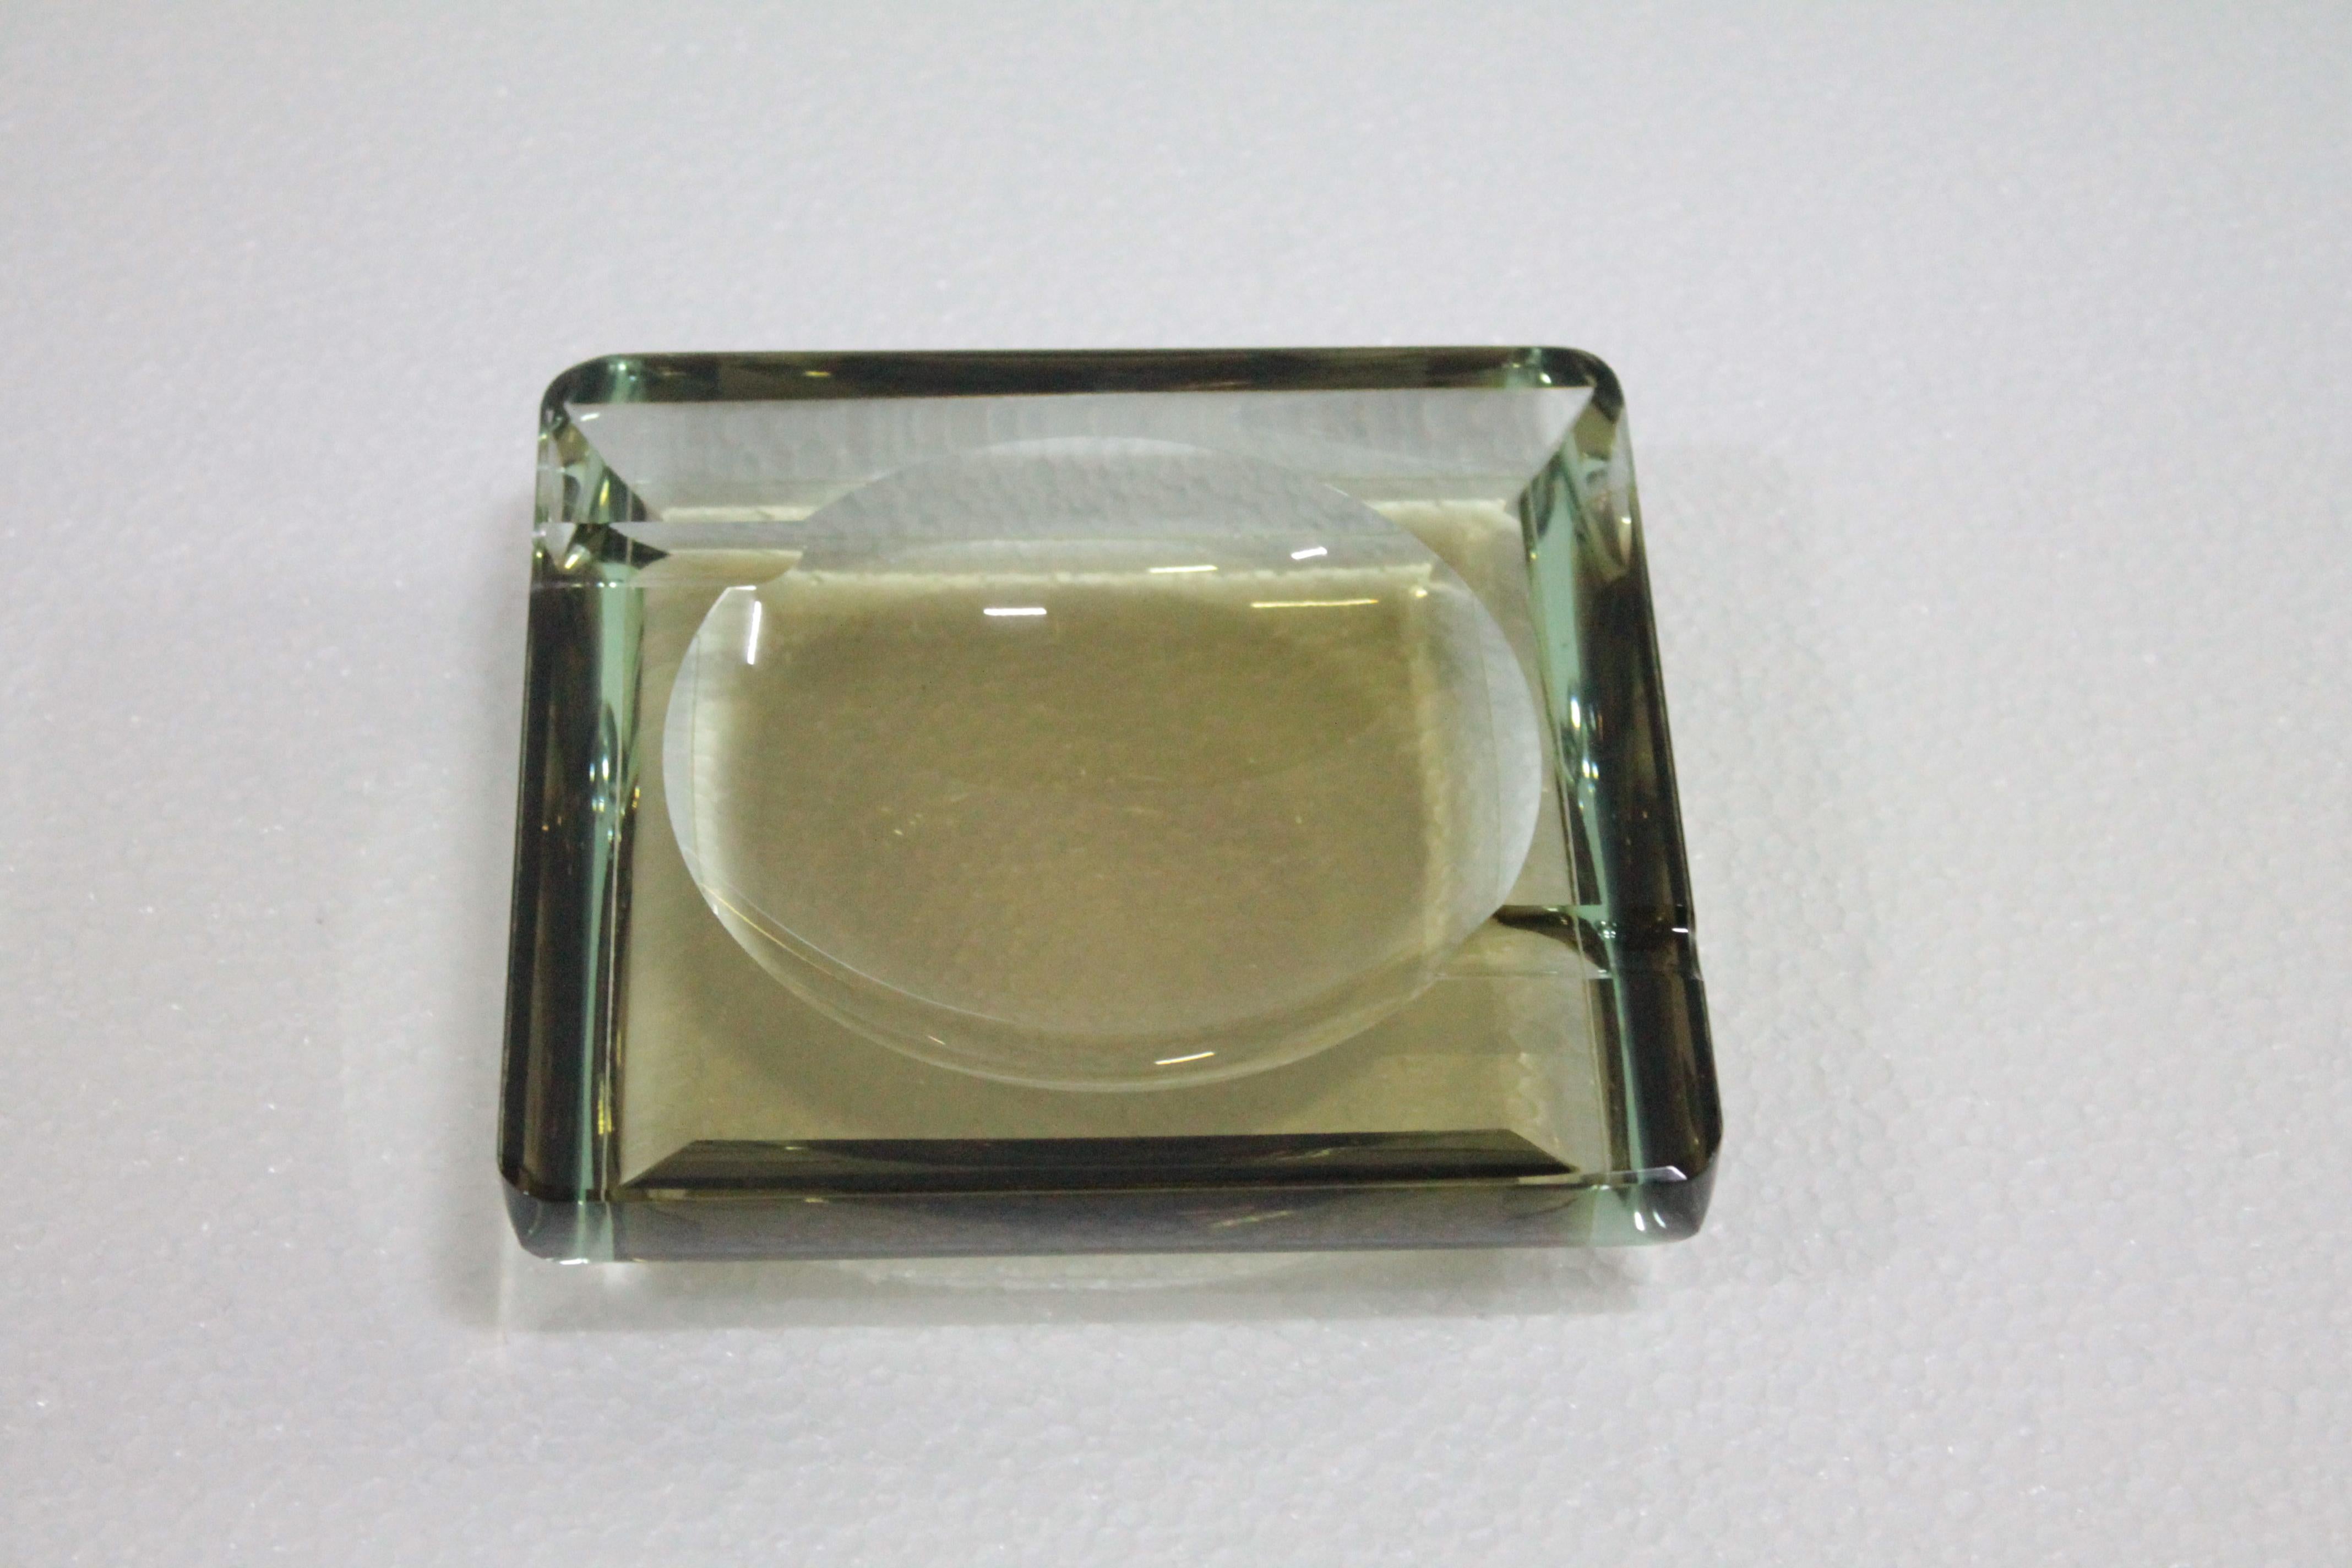 Delicious 1960s thick ashtray produced in Italy by Fontana Arte, perfectly intact, the glass has a double tone that makes it even more unique.

Measurements: W 15 x 15 cm, H 3.5 cm.